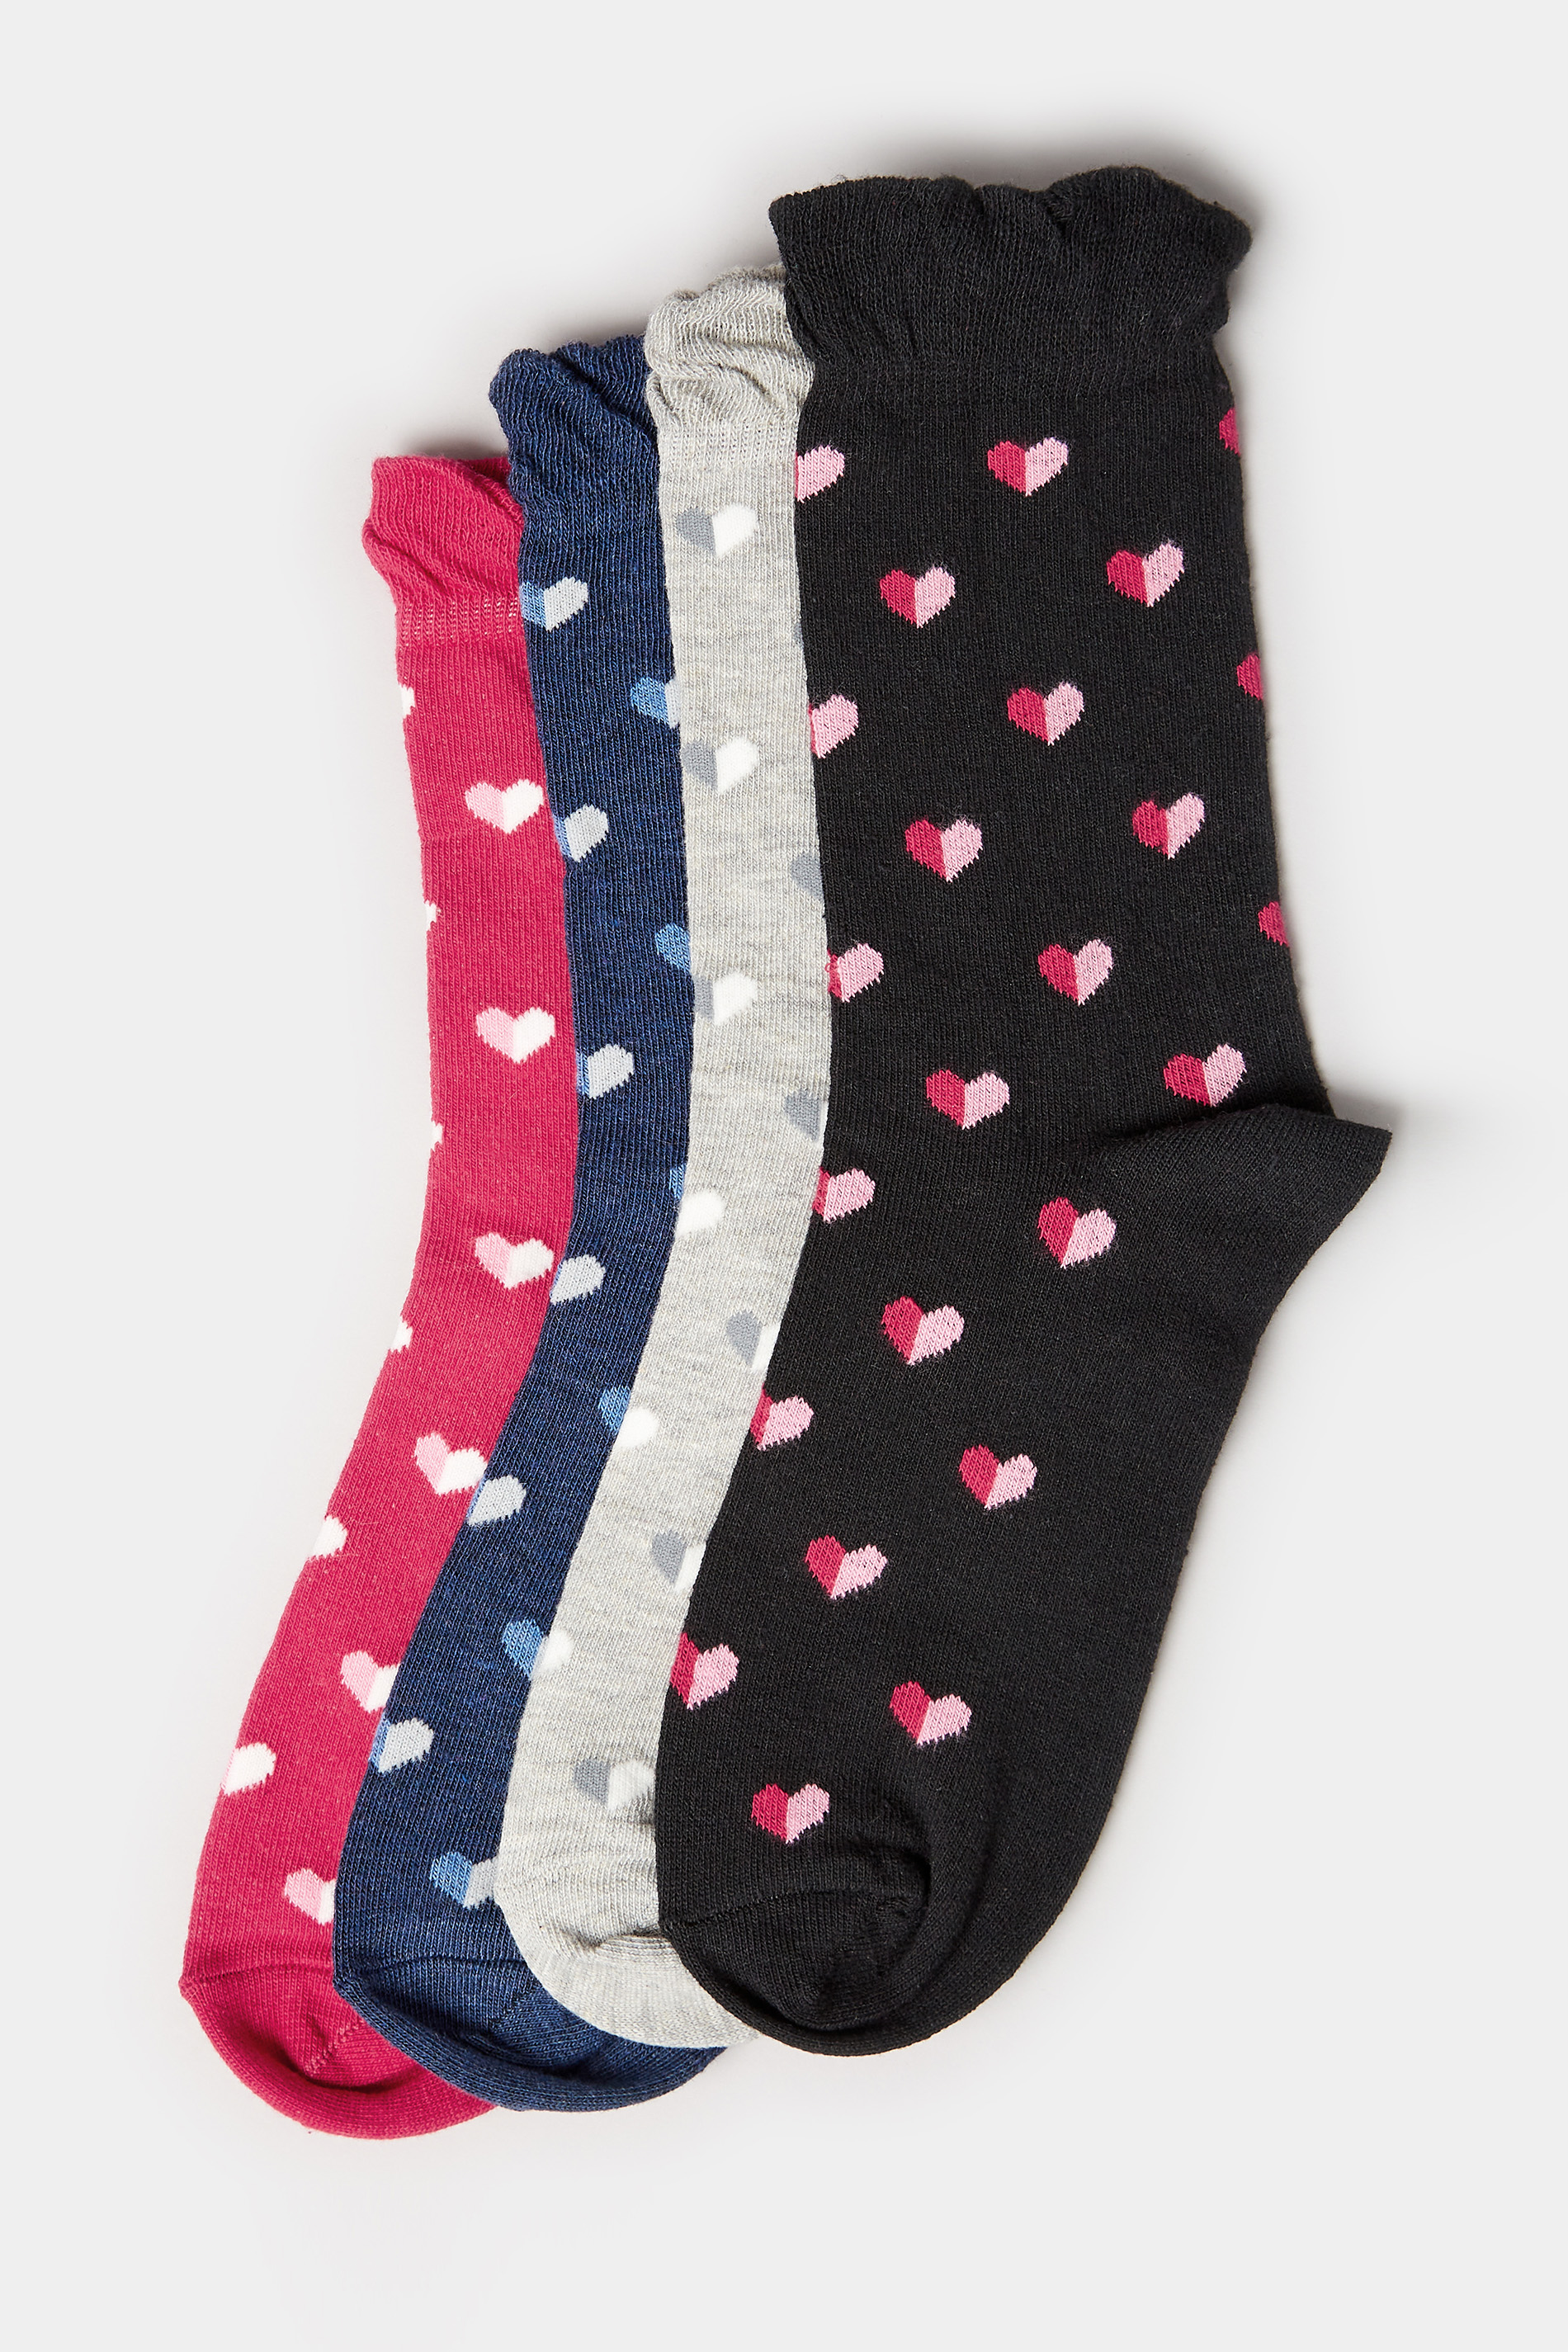 YOURS 4 PACK Black & Pink Heart Print Ankle Socks | Yours Clothing 3